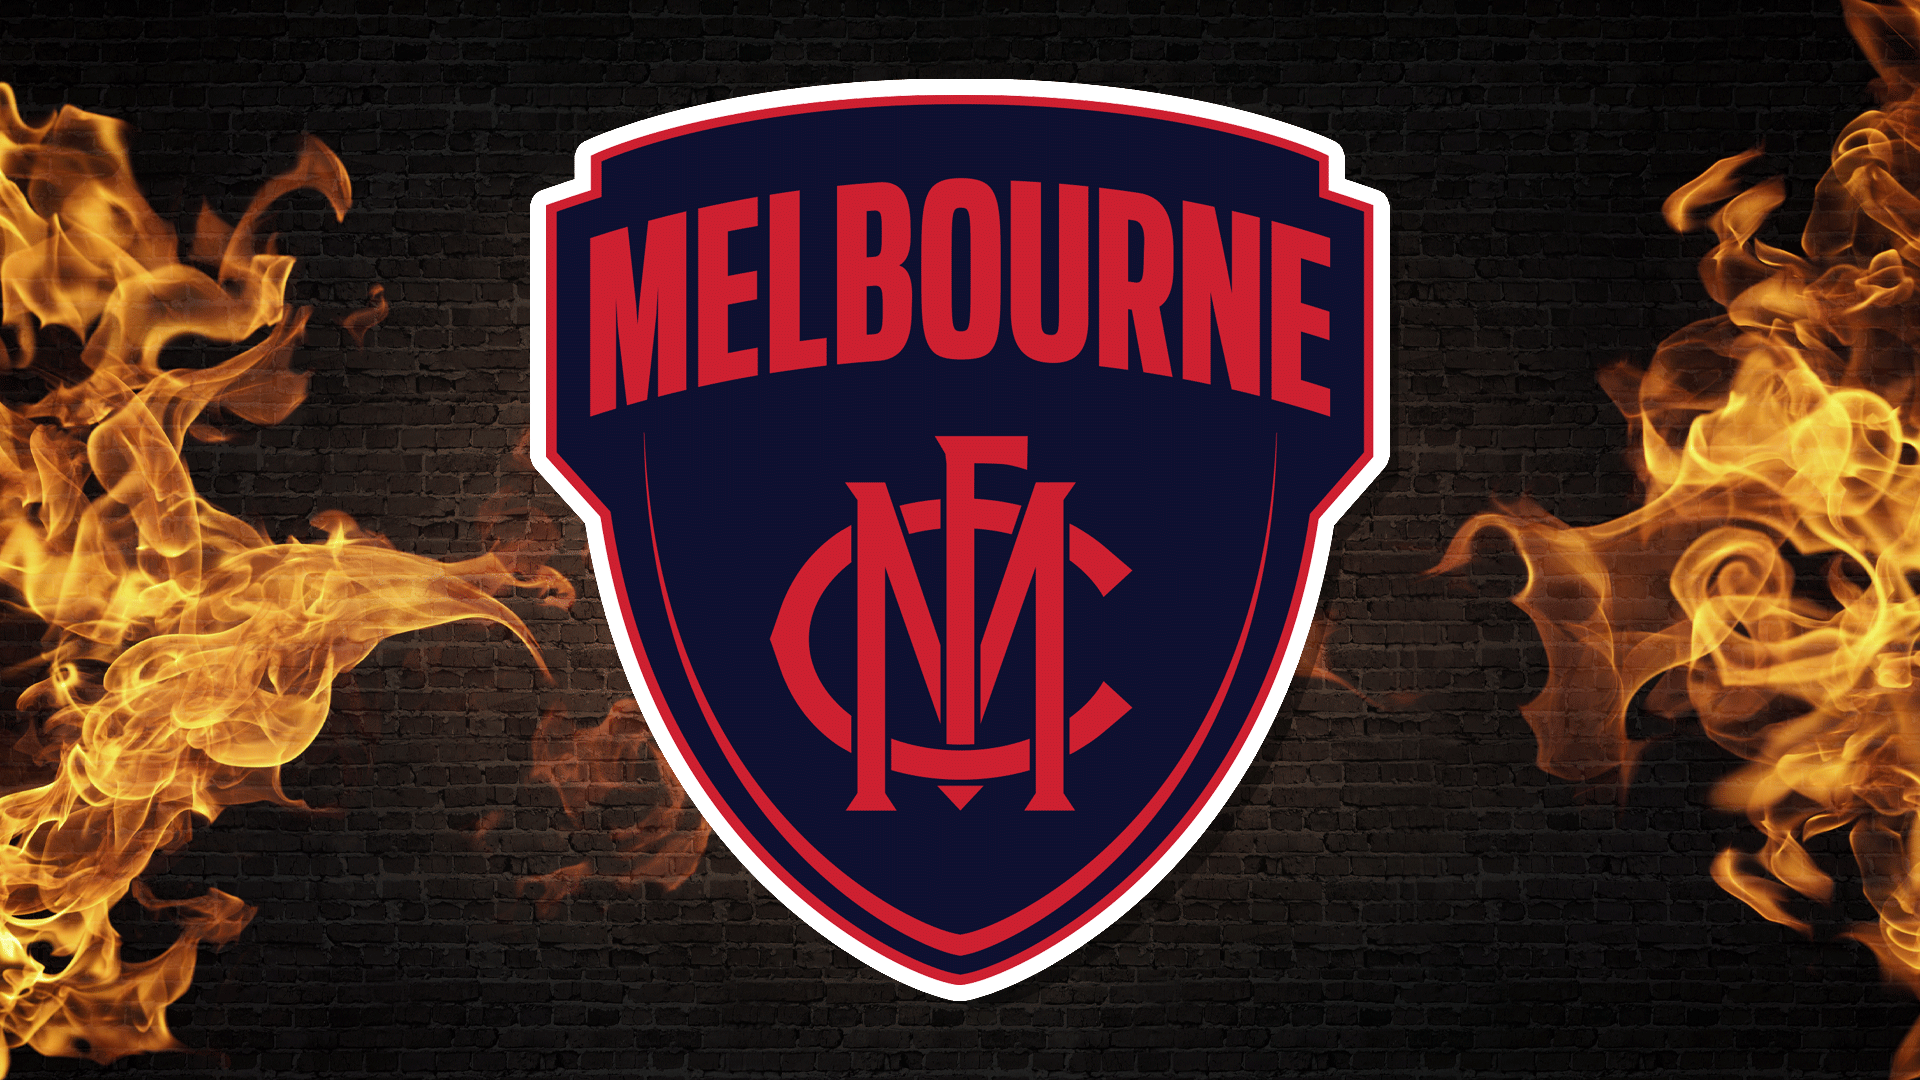 Melbourne FC's badge and a fiery background